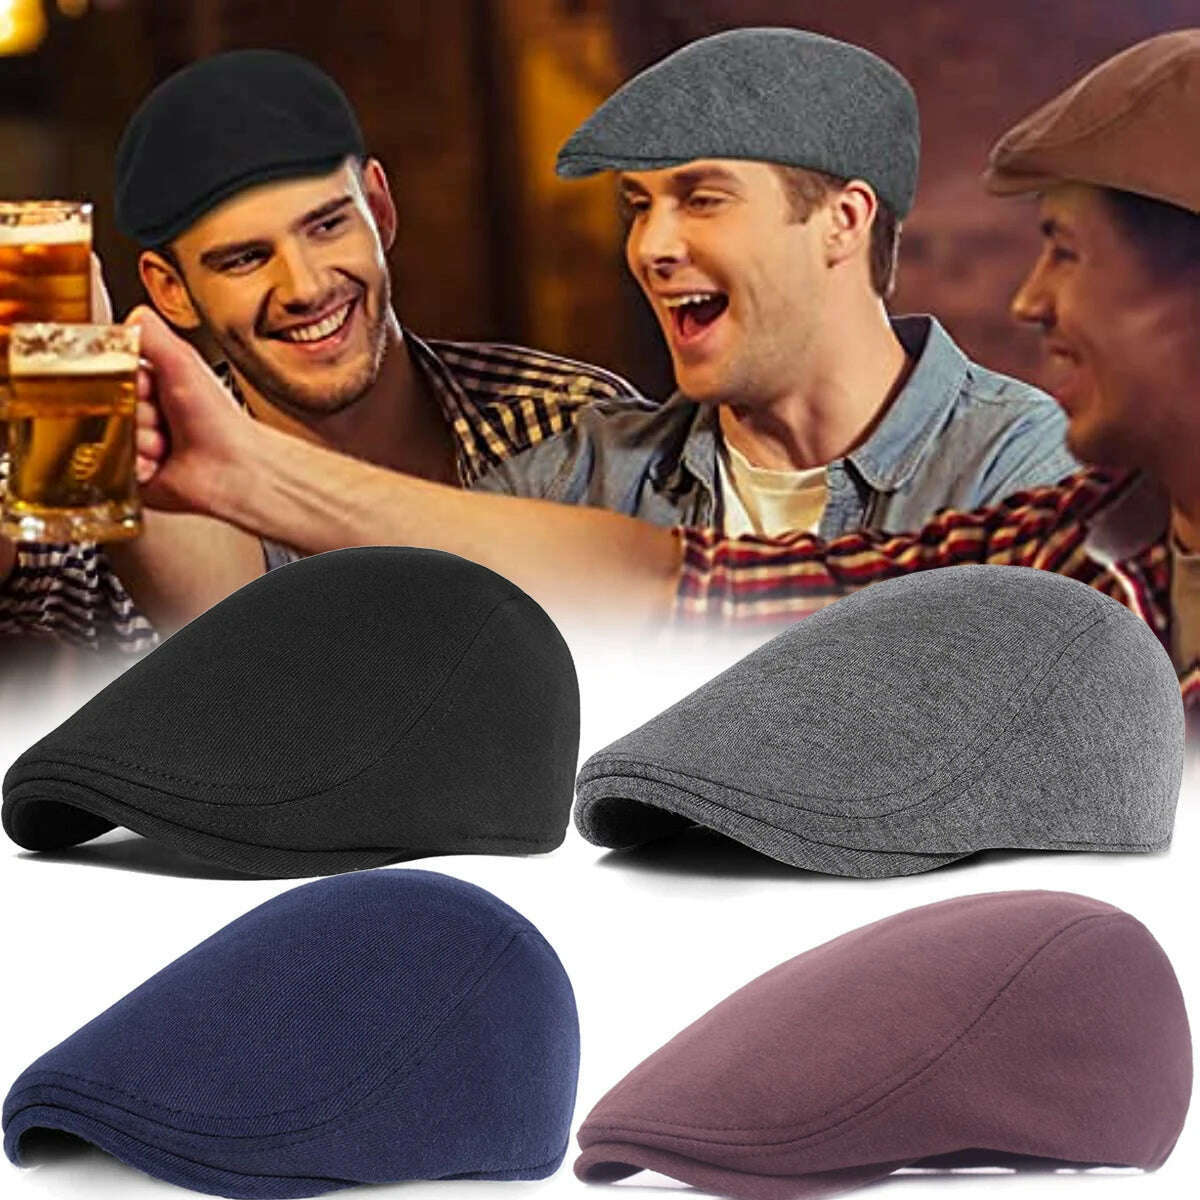 KIMLUD, New Men Berets Spring Autumn Winter British Style Newsboy Beret Hat Retro England Hats Male Hats Peaked Painter Caps for Dad, KIMLUD Women's Clothes